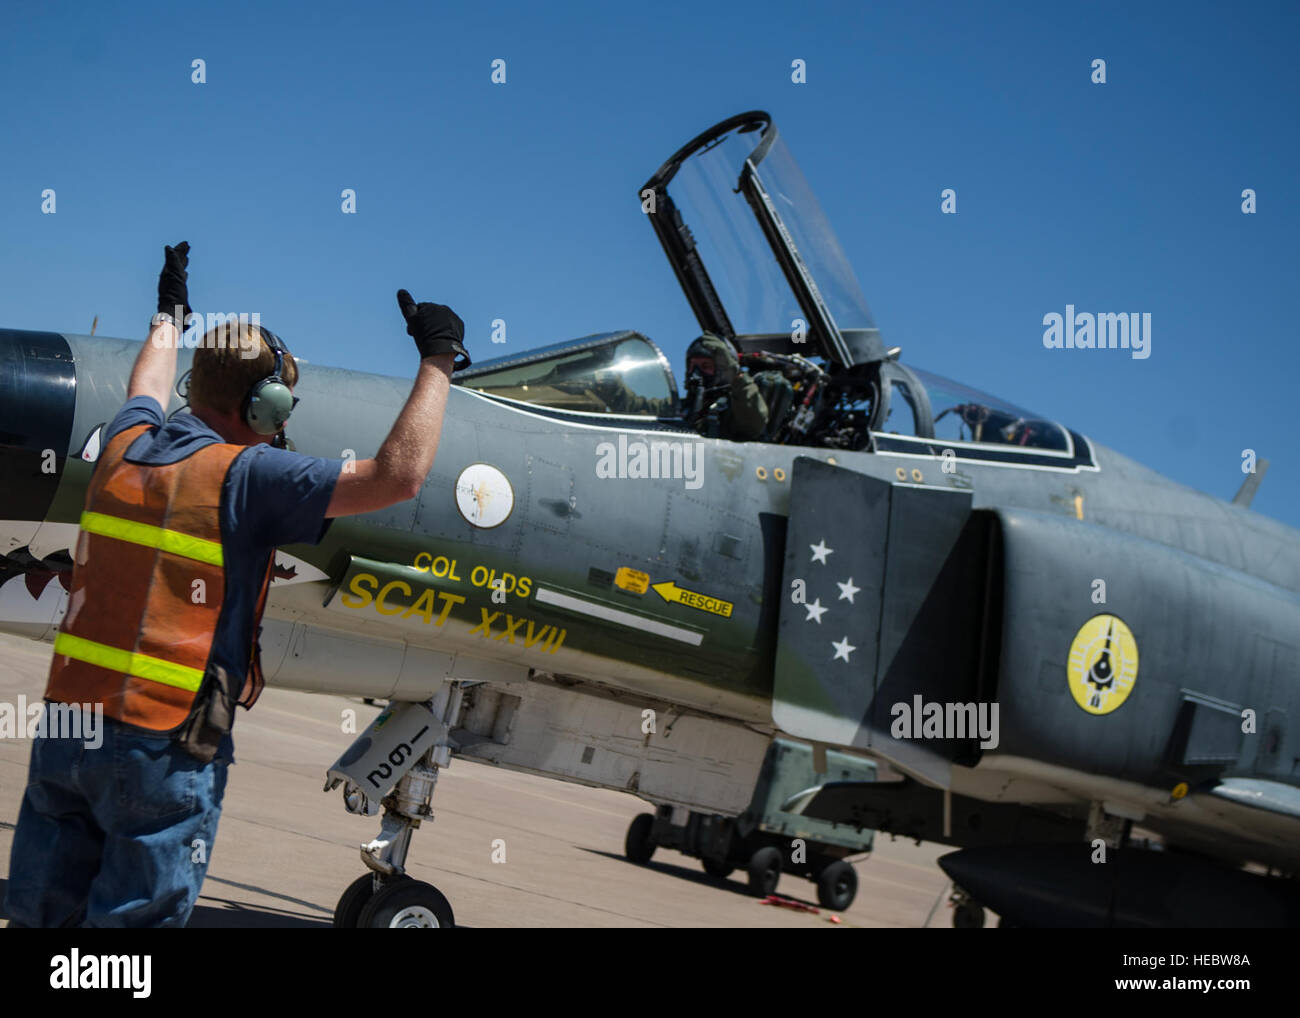 Lt. Col. Ronald King, 82nd Aerial Target Squadron, Detachment 1 commander and Mike Fogle, QF-4 Drone mechanic, go through a pre-flight checklist June 3, 2015 at Holloman Air Force Base, N.M. King flew his first solo flight in the QF-4 Drone on June 3, making him the last pilot who will ever learn to fly the QF-4. At Holloman, QF-4s can be flown either manned or unmanned and are used as remotely controlled unmanned targets for air-to-air and ground-to-air weapons systems evaluations, development and testing.  (U.S. Air Force photo by Airman 1st Class Emily A. Kenney/Released) Stock Photo